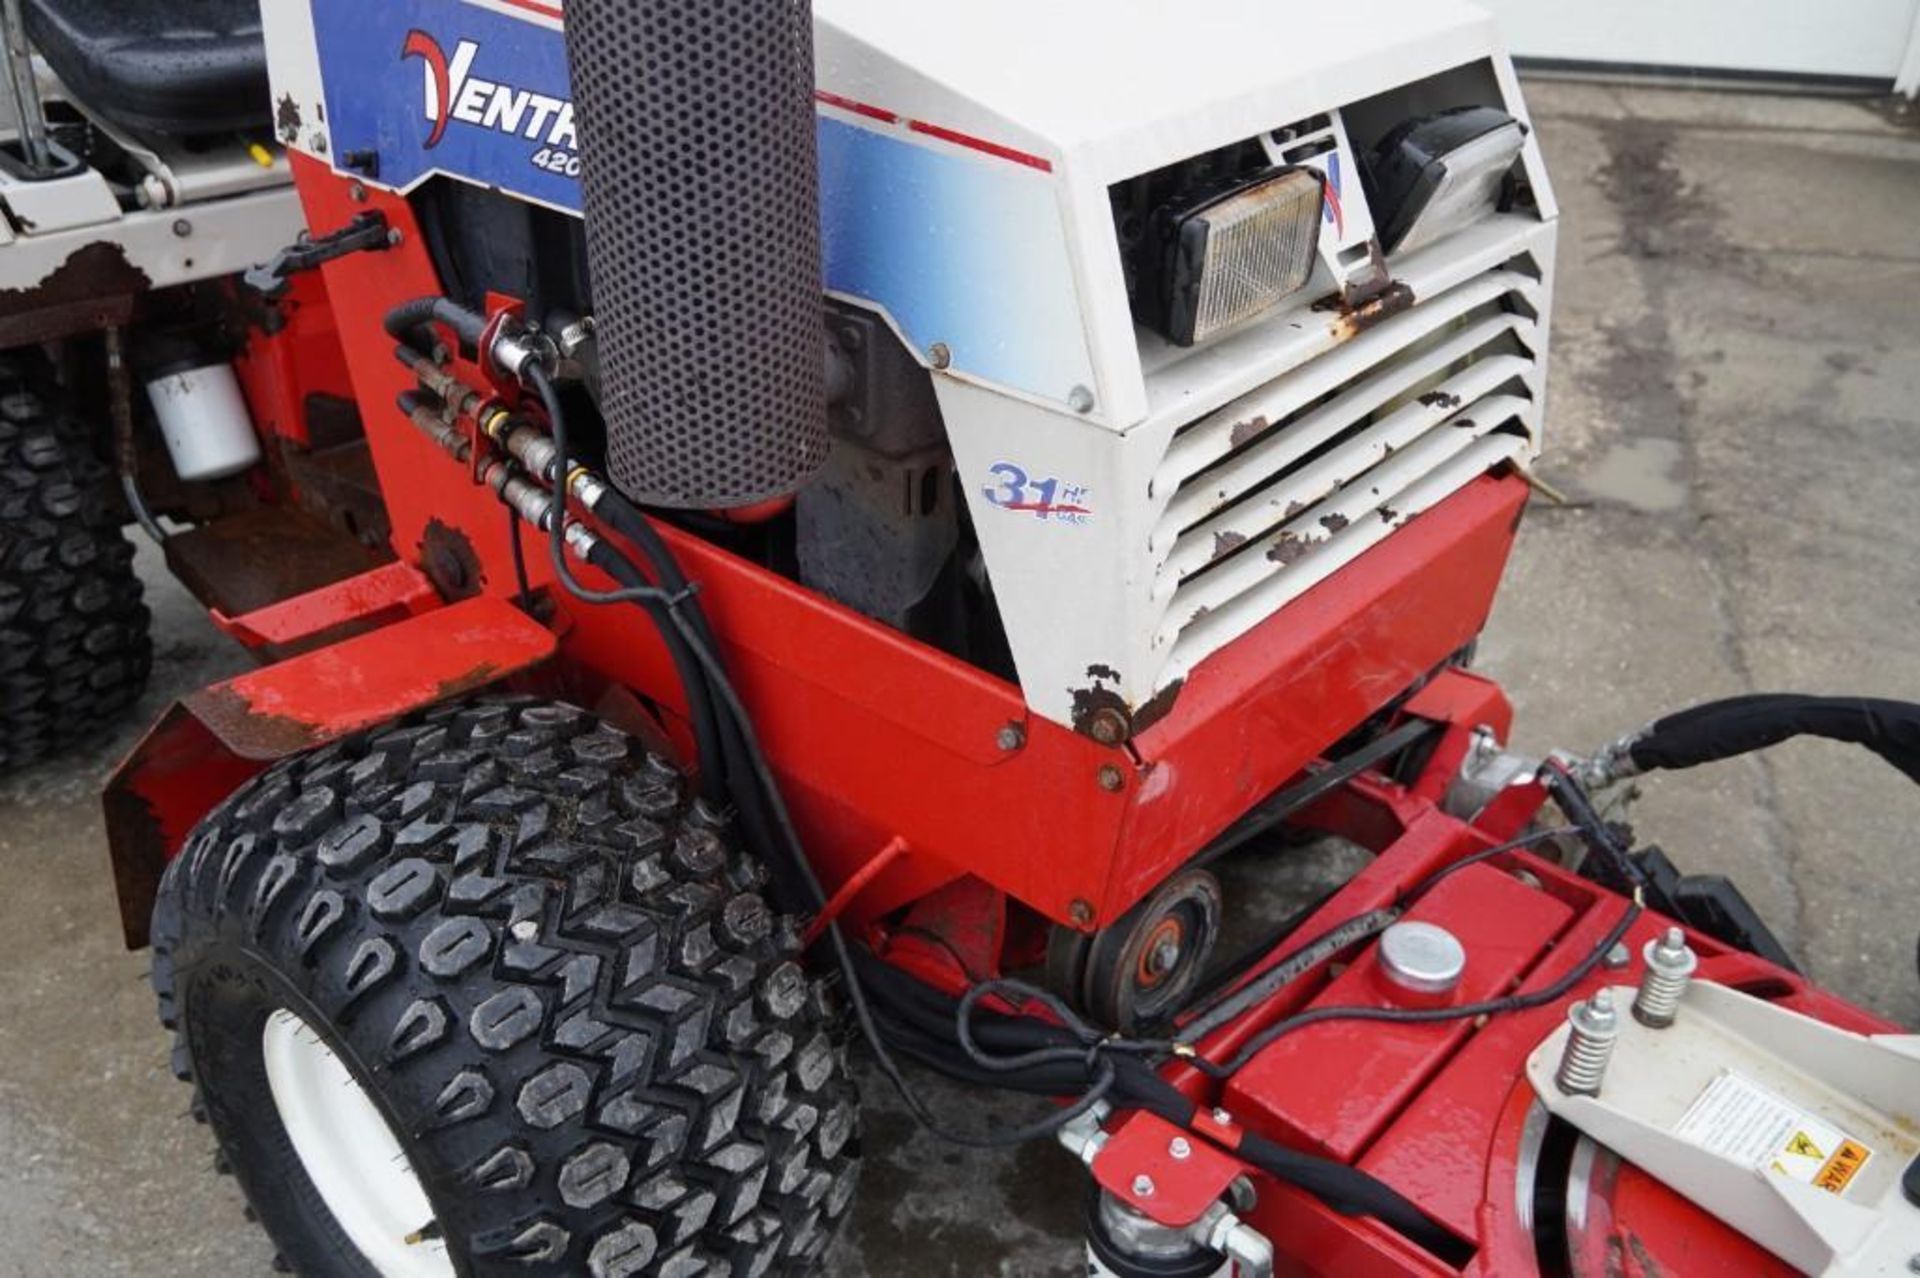 Ventrac 4200 Tractor - Image 37 of 37